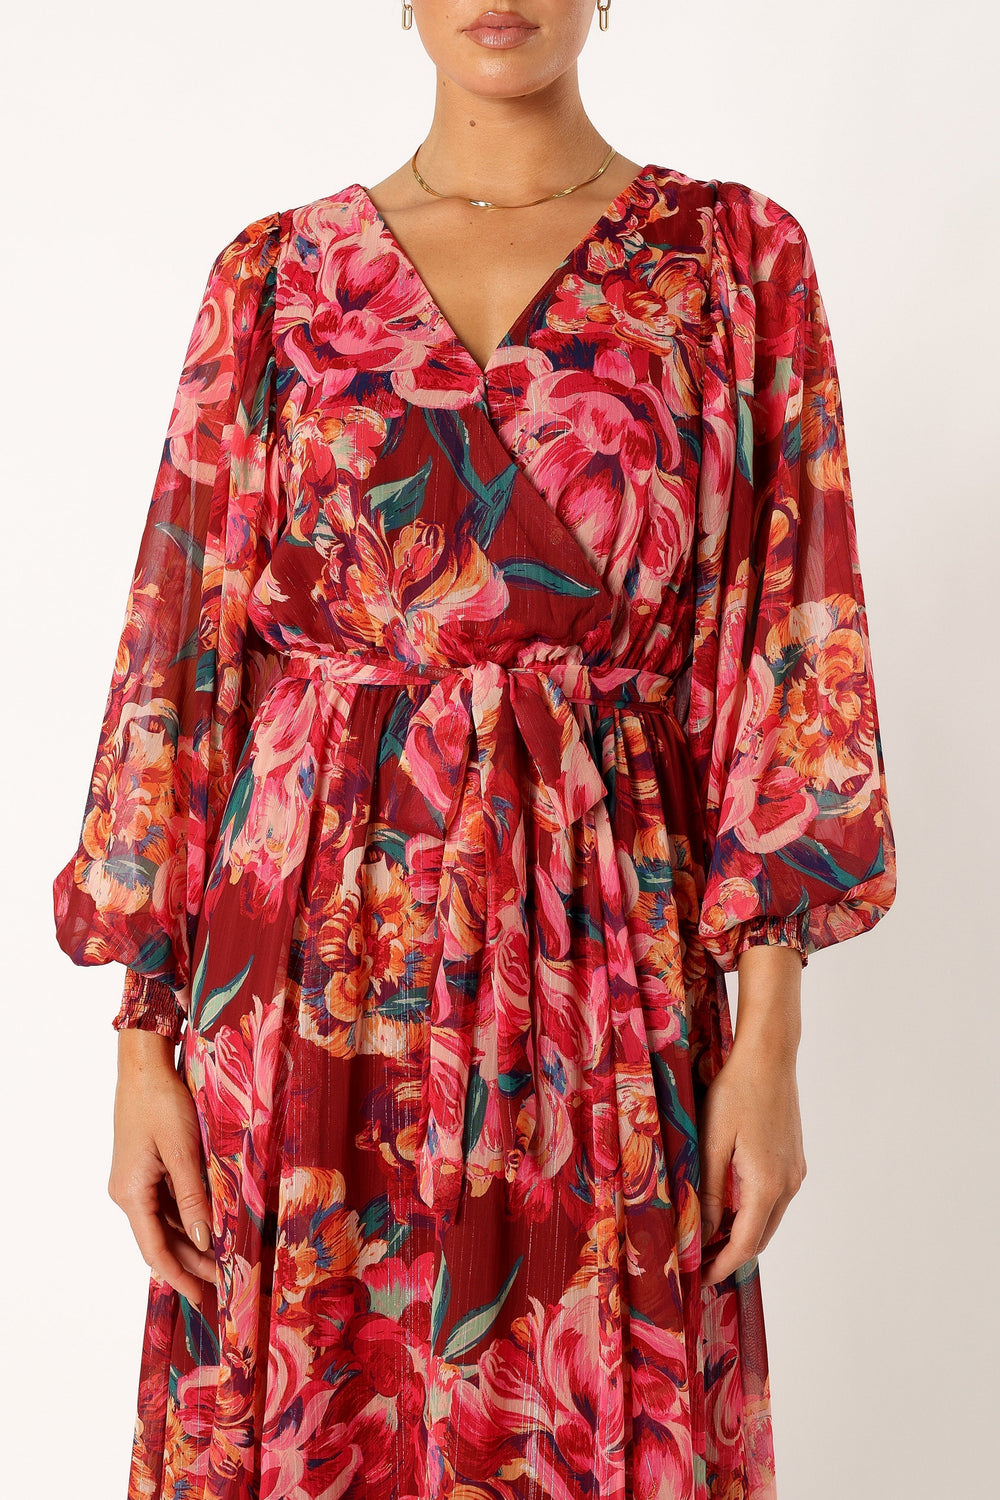 Petal and Pup USA DRESSES Goldie Longsleeve Maxi Dress - Red Floral